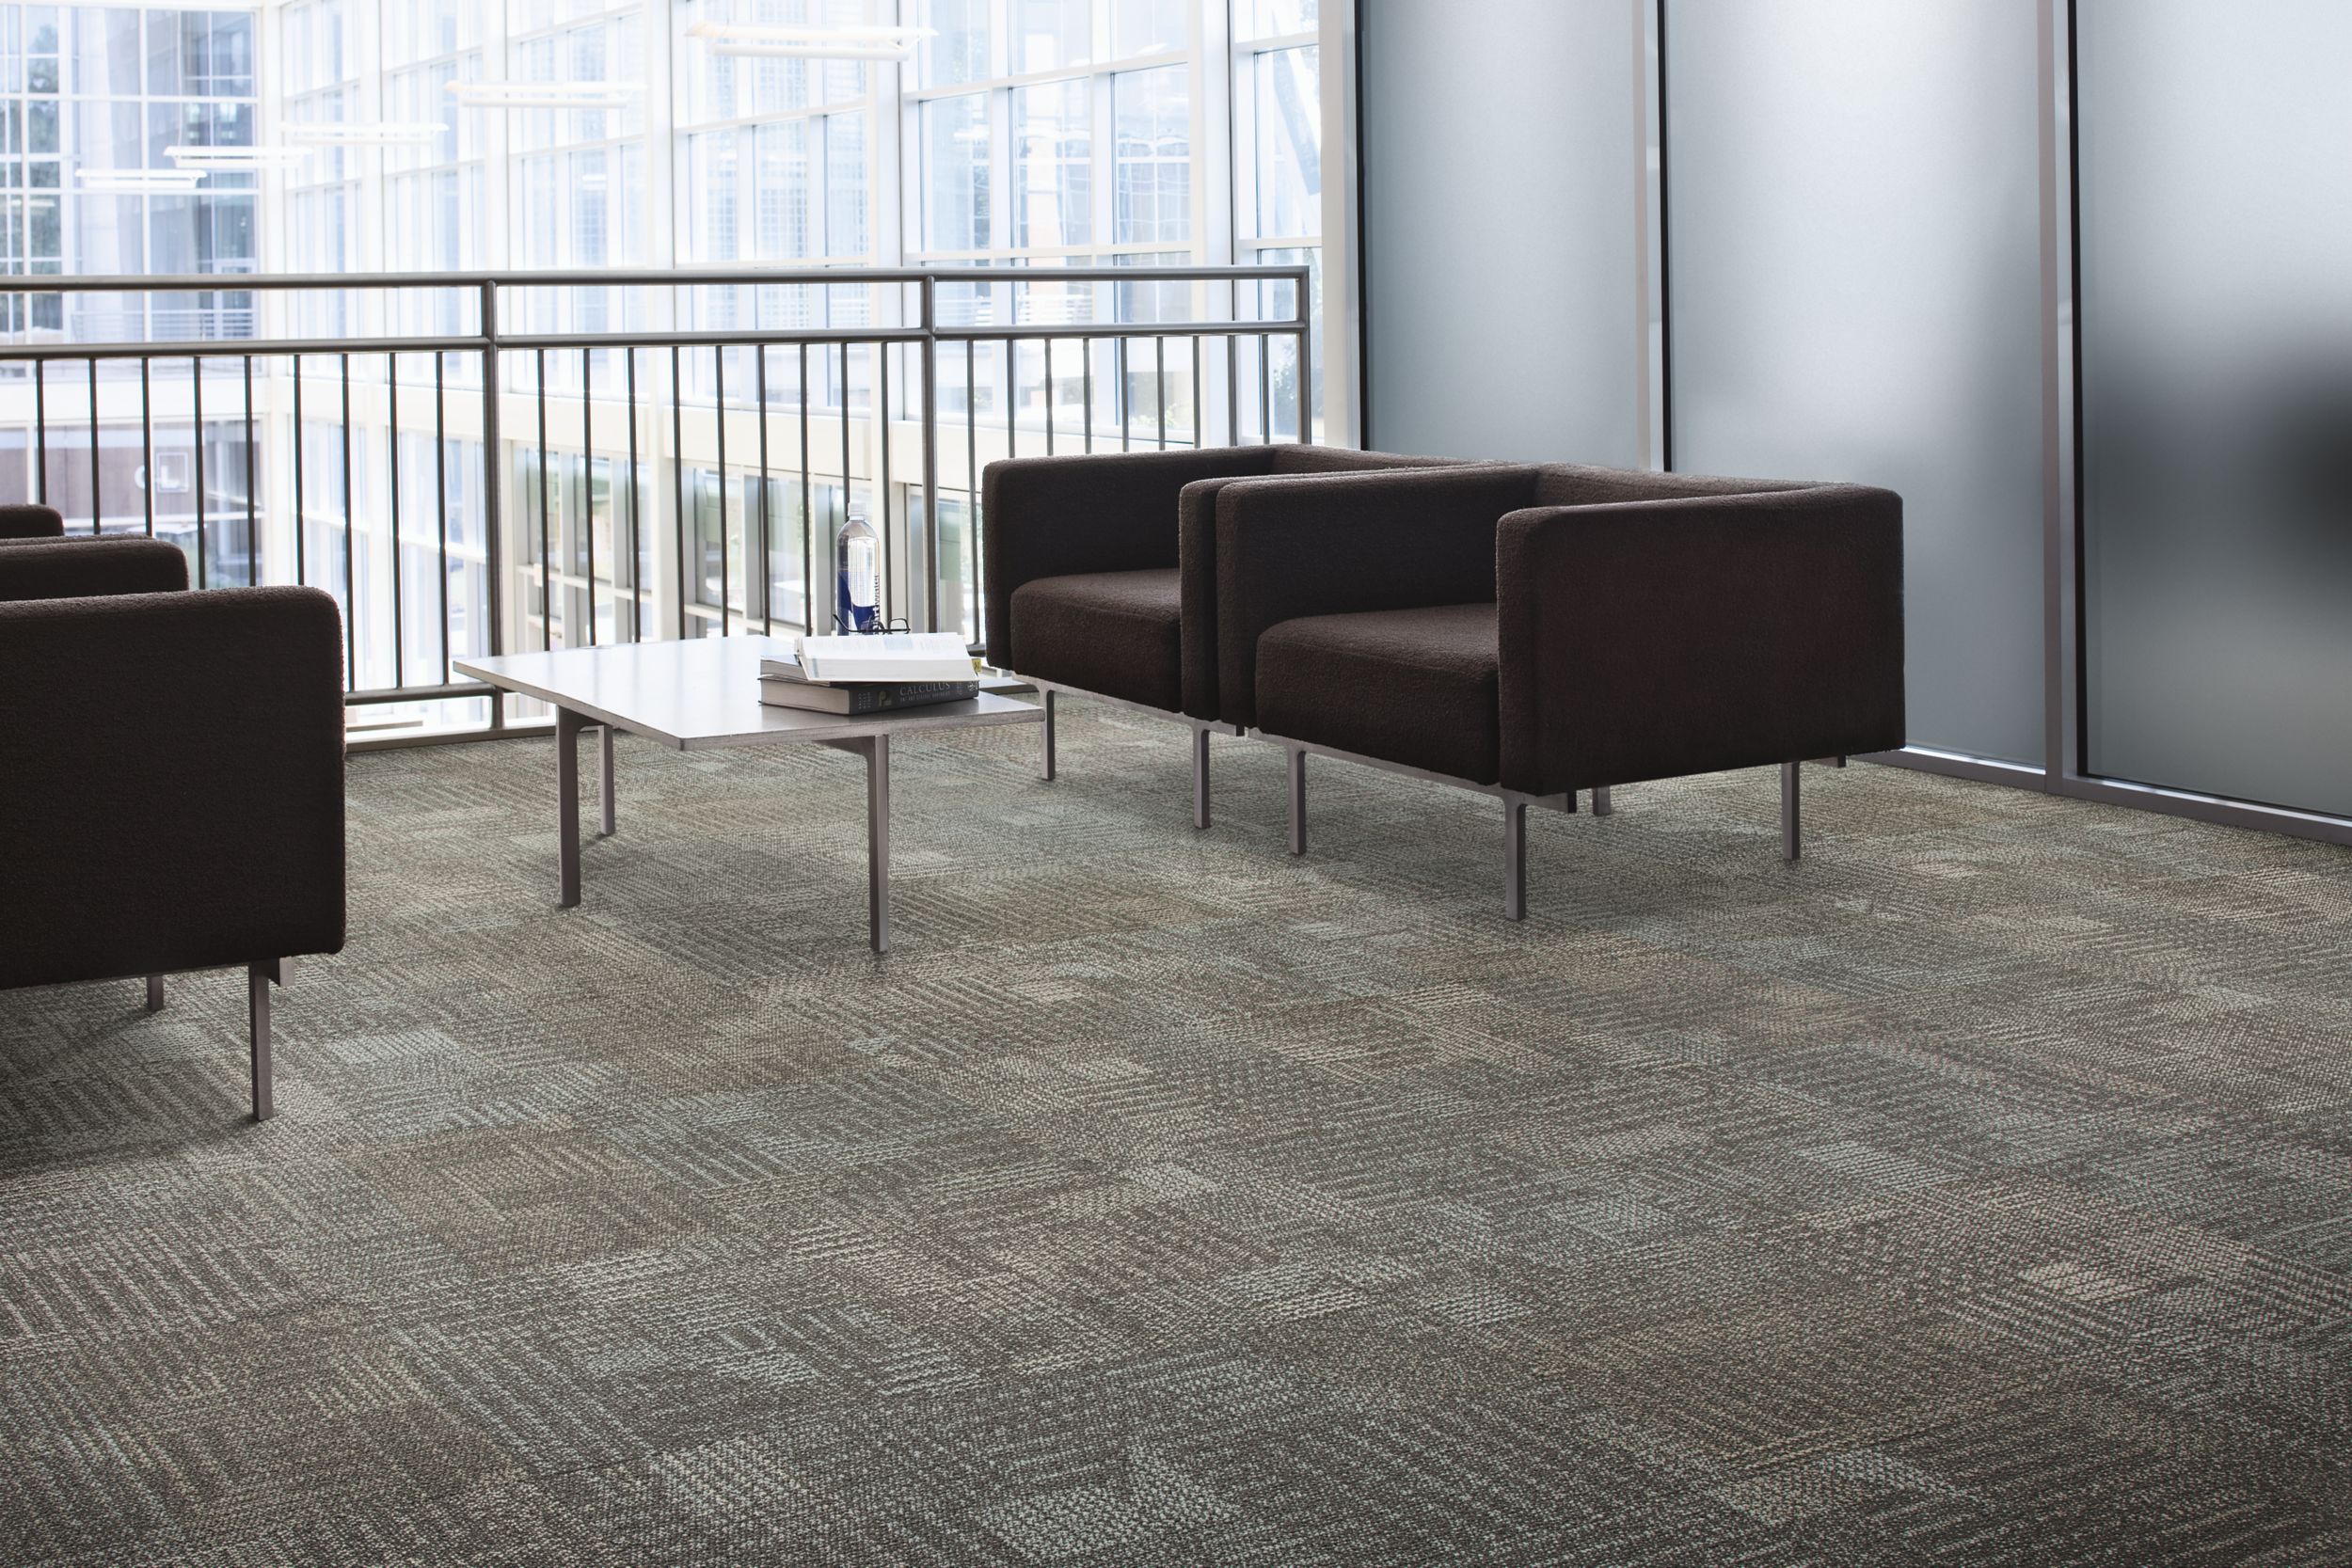 Interface Work carpet tile in lobby setting with couch and chairs numéro d’image 1